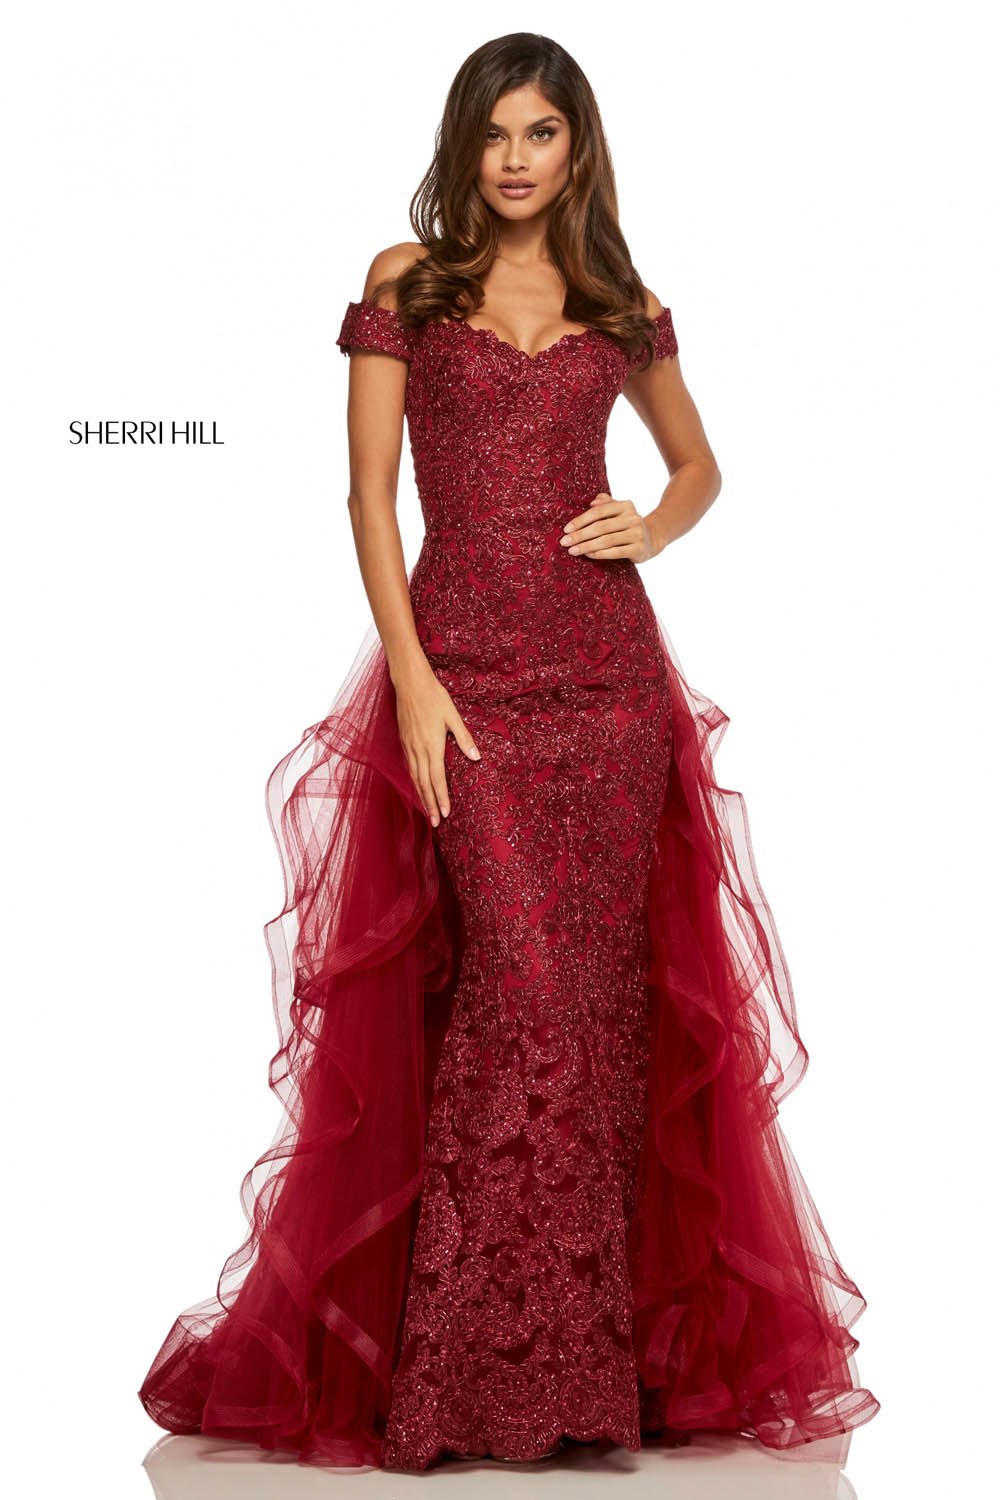 Sherri Hill 52556 dress images in these colors: Rose Gold, Wine, Ivory Gold, Black, Light Blue.